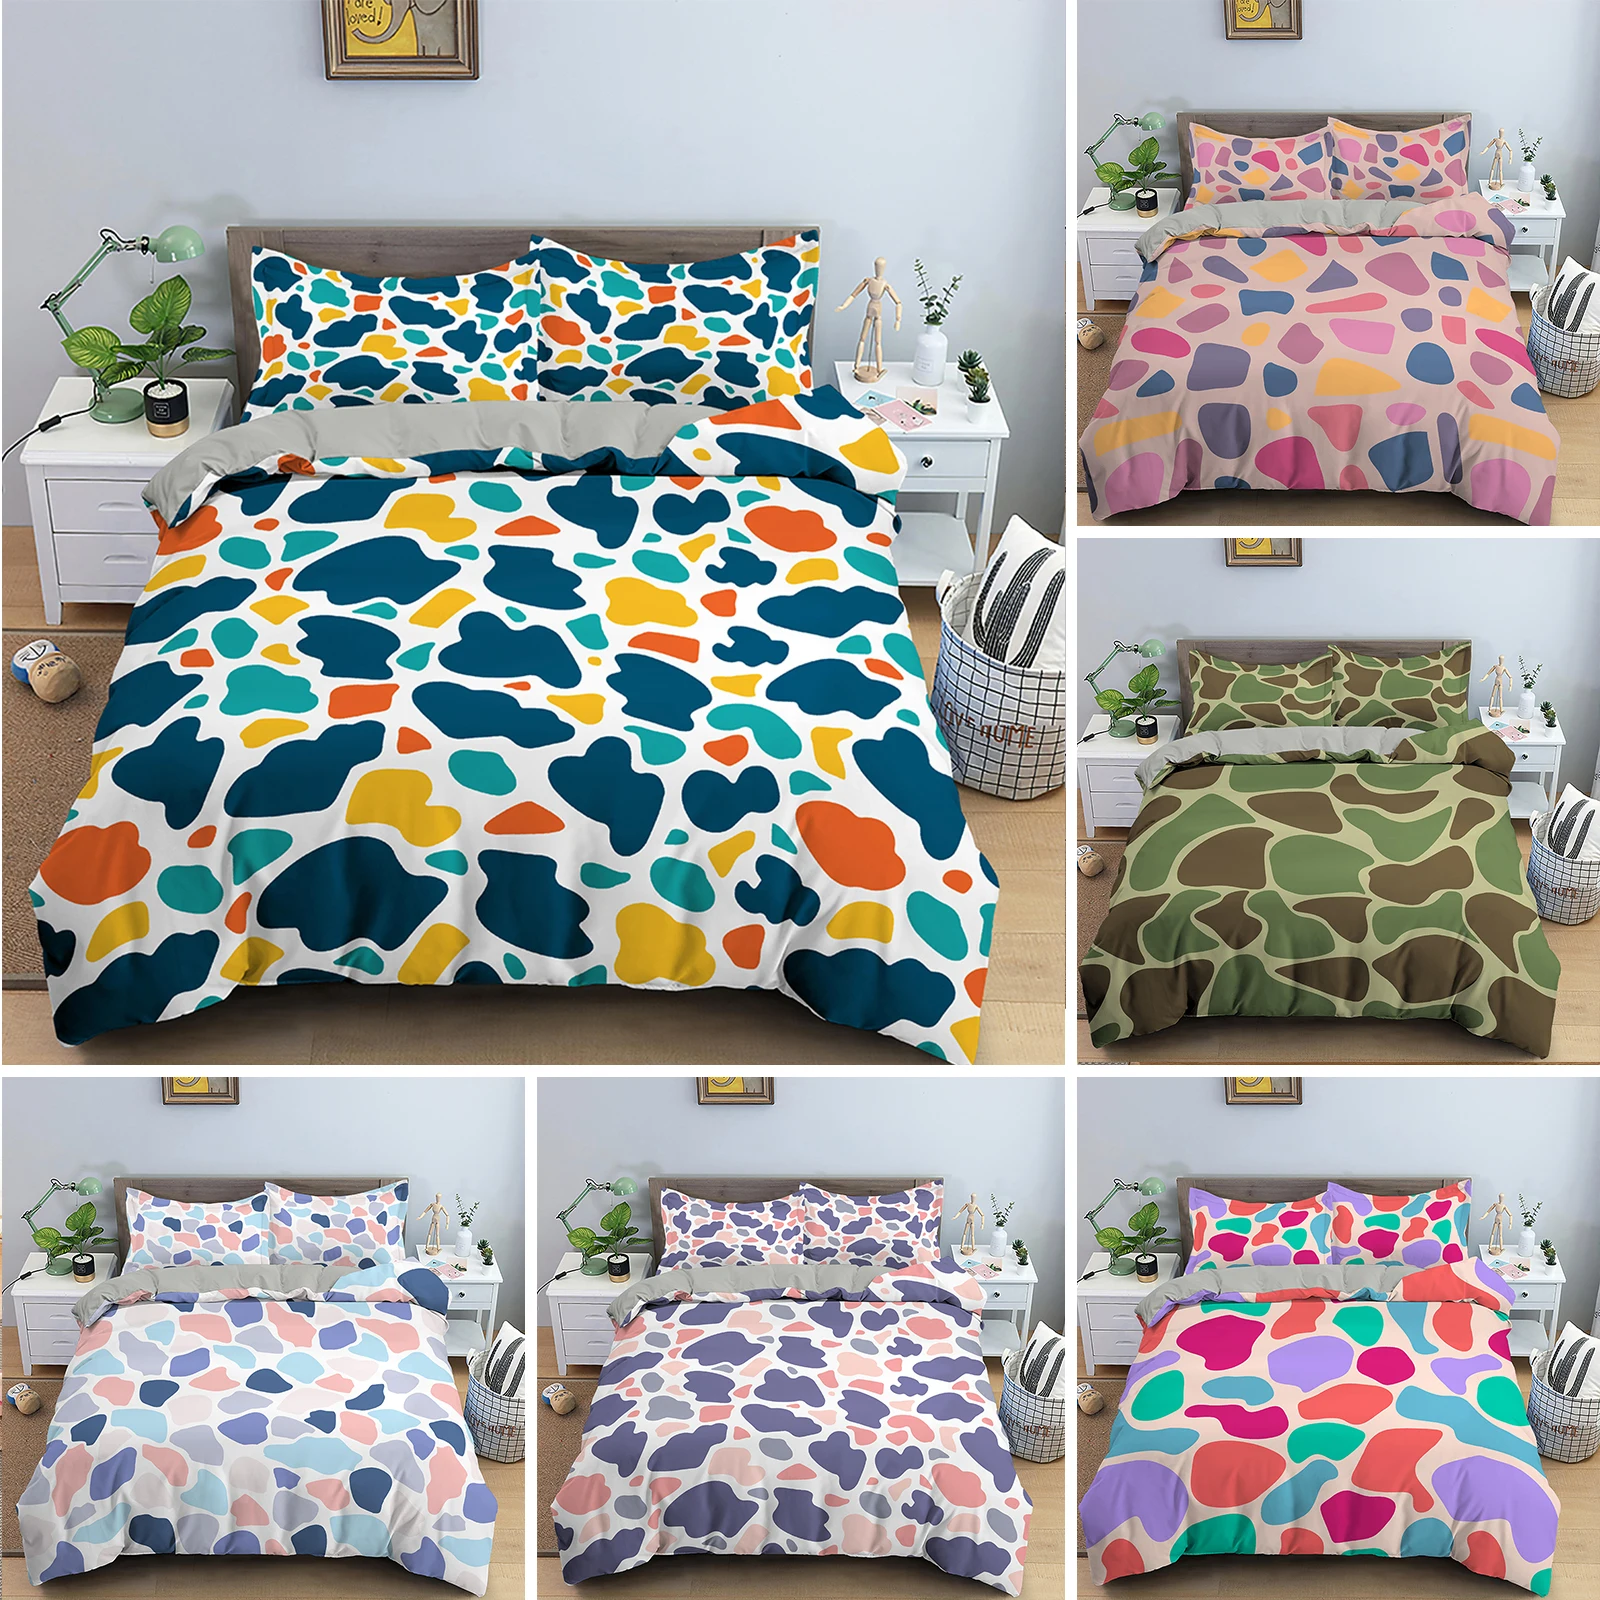 

Colorful Spots Print Bedding Set Polyester Duvet Cover With Pillowcase Adults Kids Quilt Cover With Zipper Closure Multiple Size